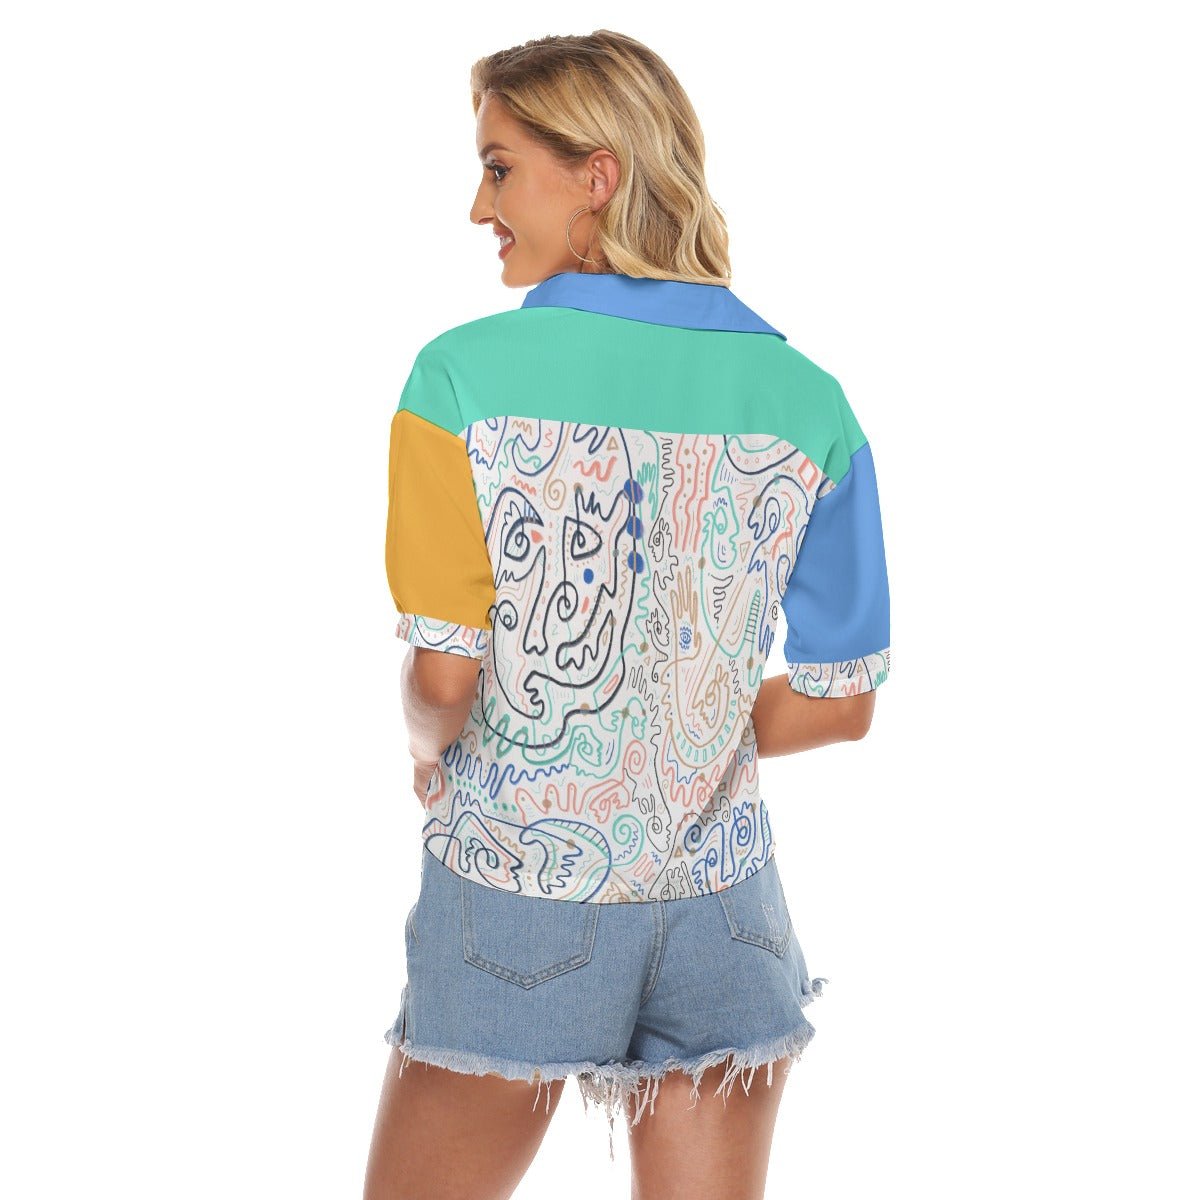 "Soul Scribbles Inverse" - Women's V-Neck Button Up Shirt | Shirts & Tops | All Around Artsy Fashion